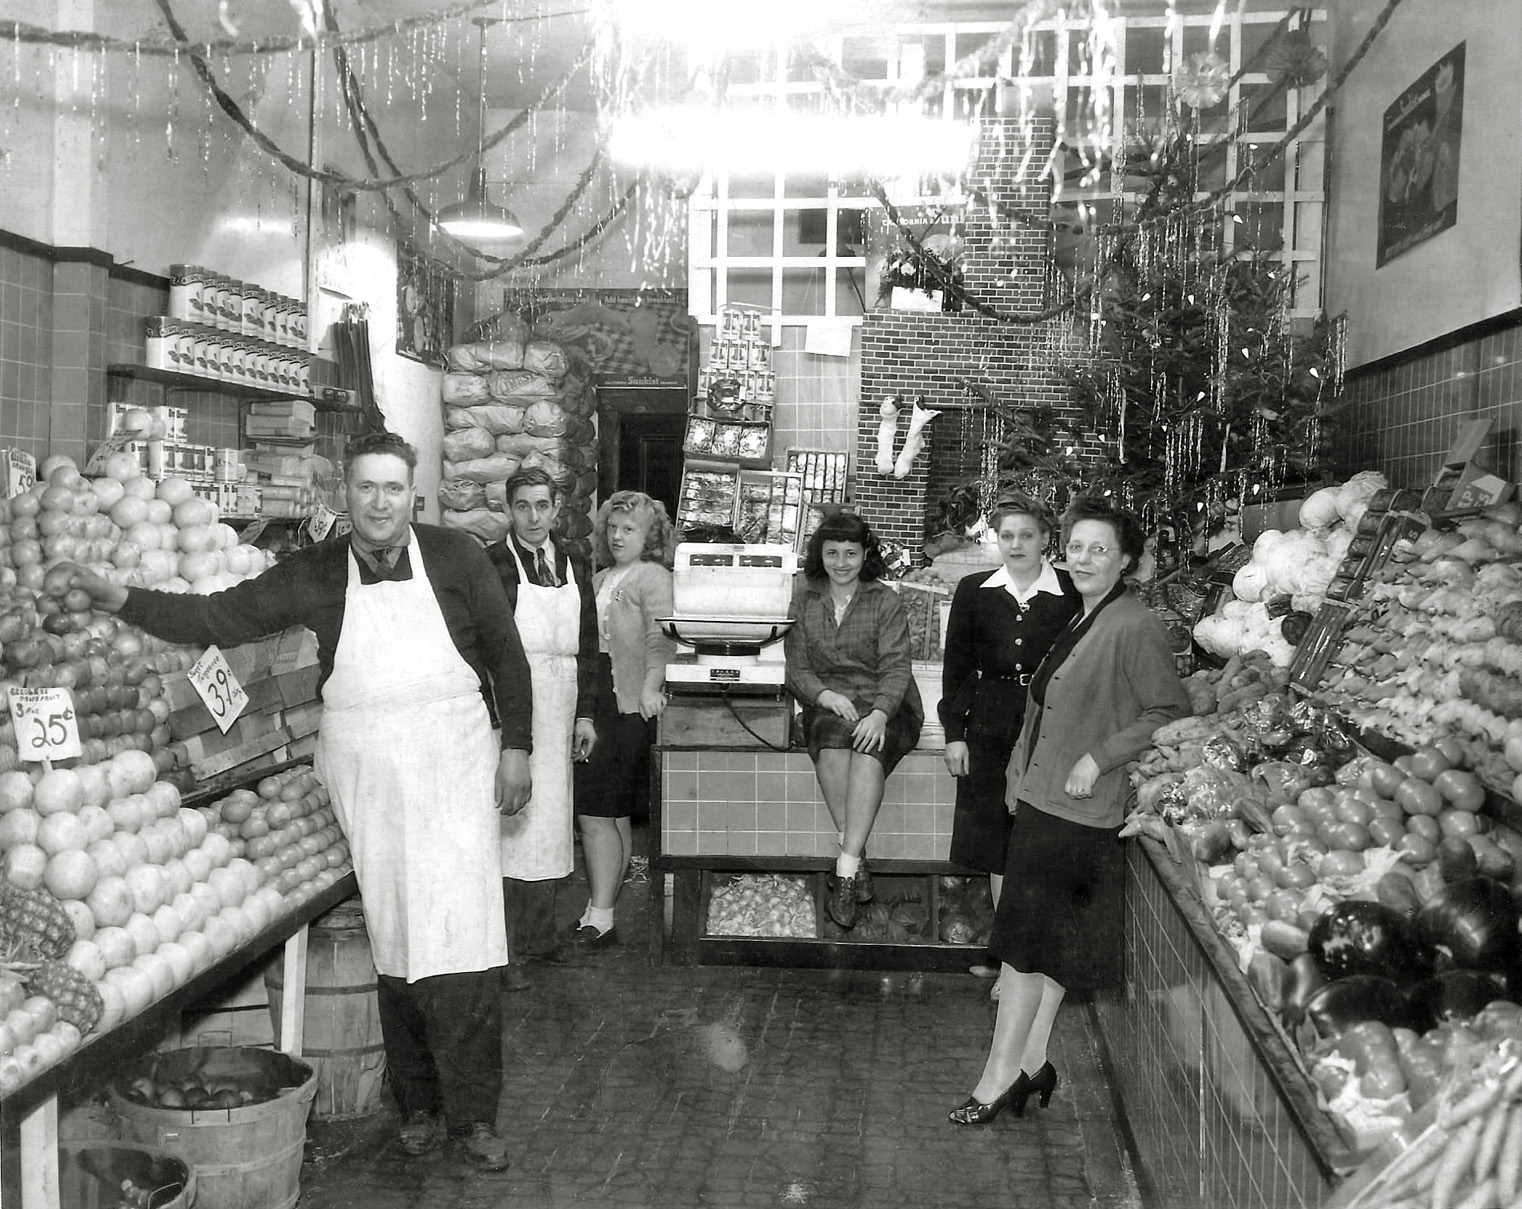 My mother, Lorraine "Rainey" LaFrance (nee Davis), center, at 17 worked at Irwin Produce Market on Main Street in Irwin, Pennsylvania.  She worked along with her father Russell, second from left, holding cigarette, and the owners, Sam Auchtenbaum, far left, and his wife Jenny on the far right. View full size.